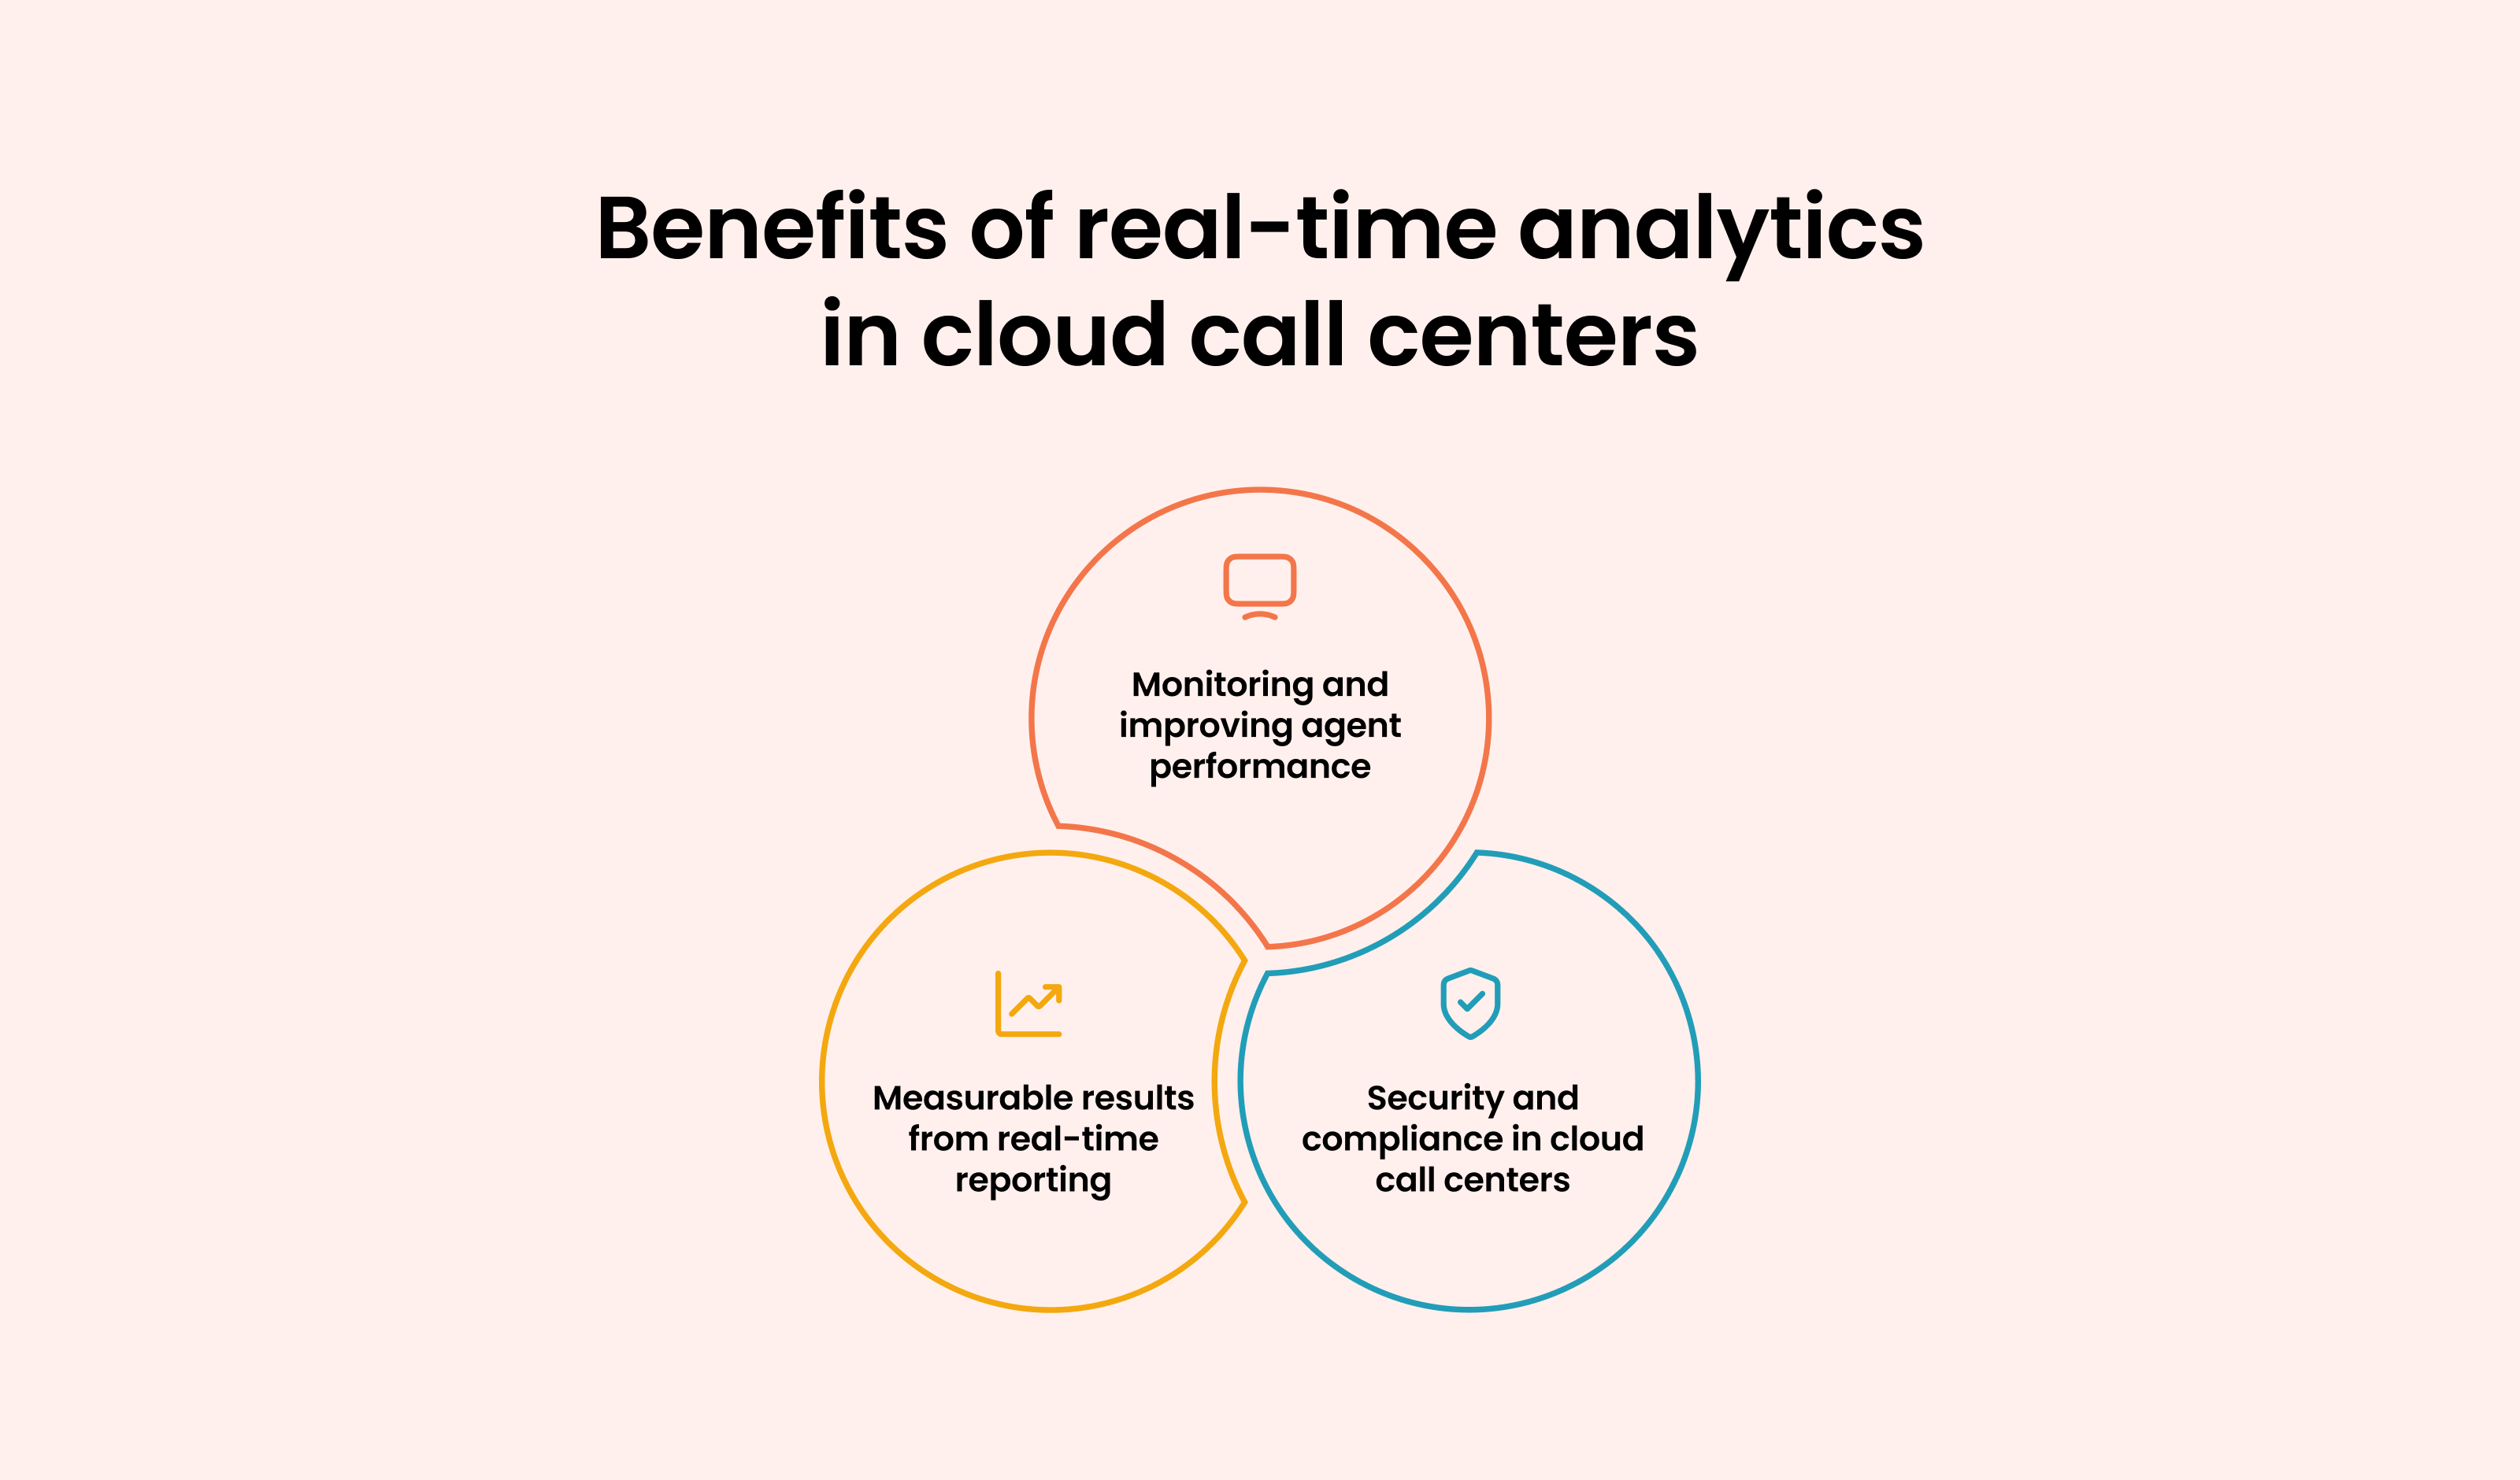 Benefits of Real-Time Analytics in Cloud Call Centers: